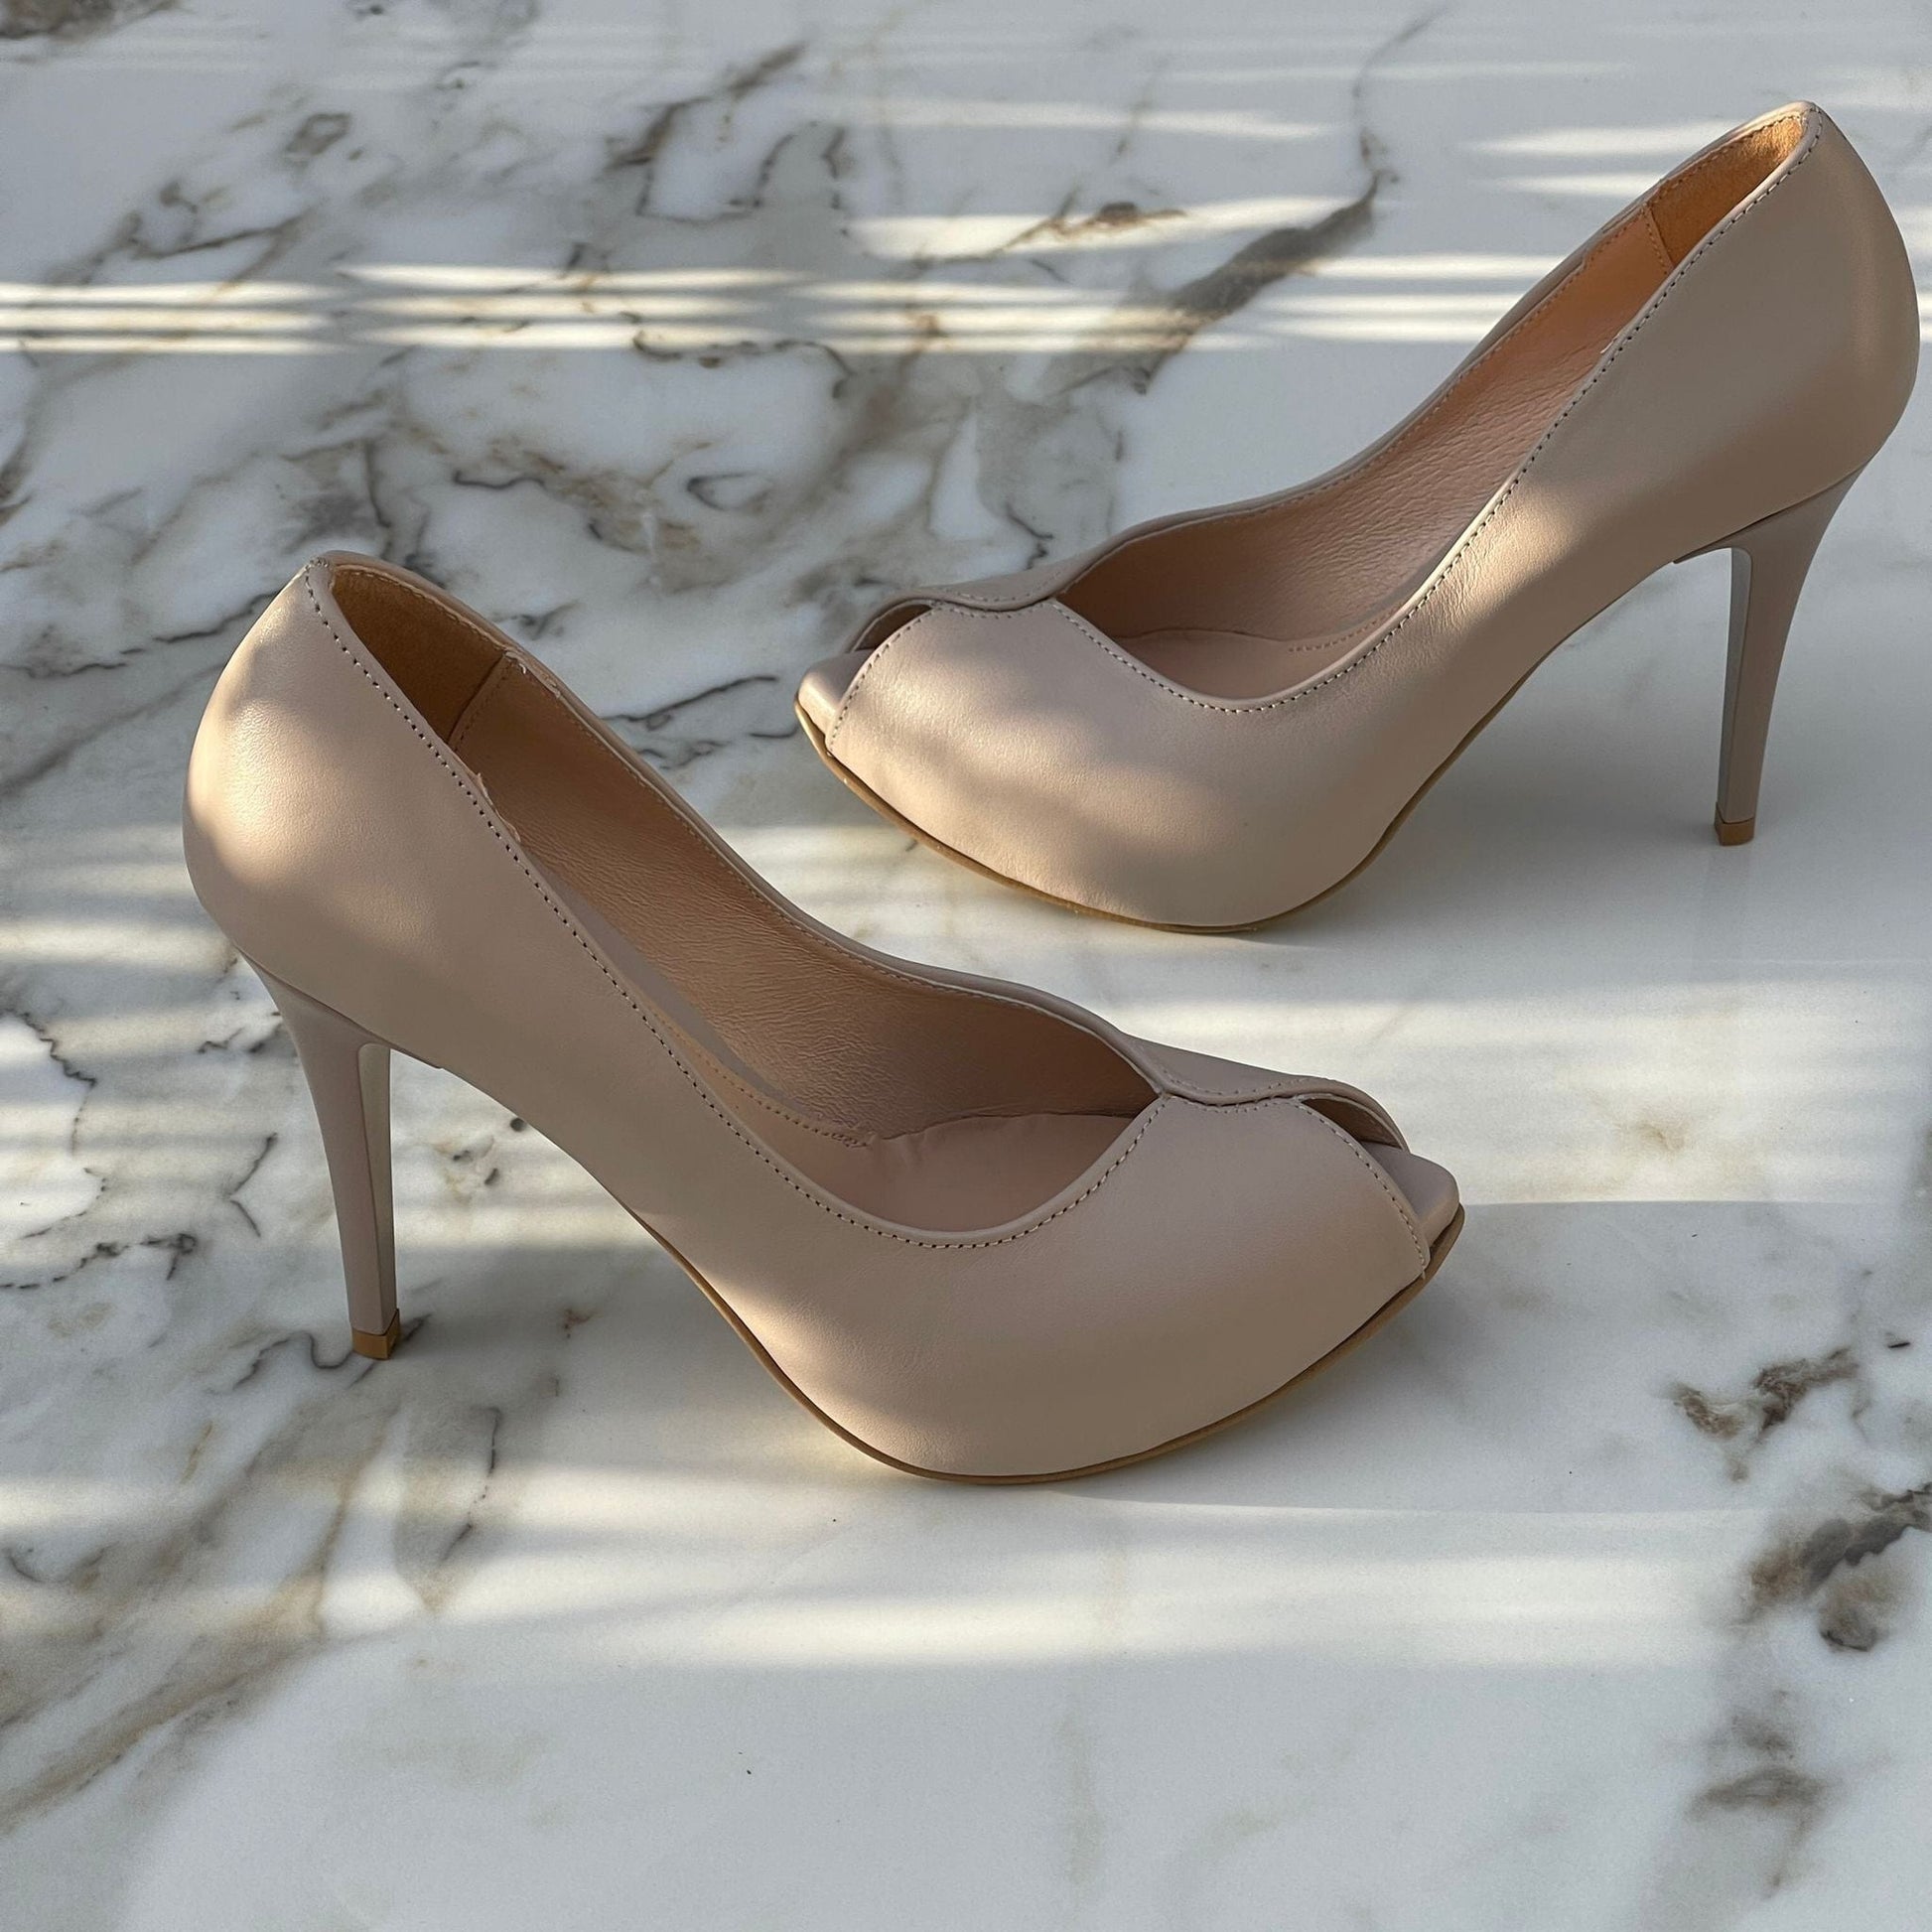 Peep toe courts in nude leather